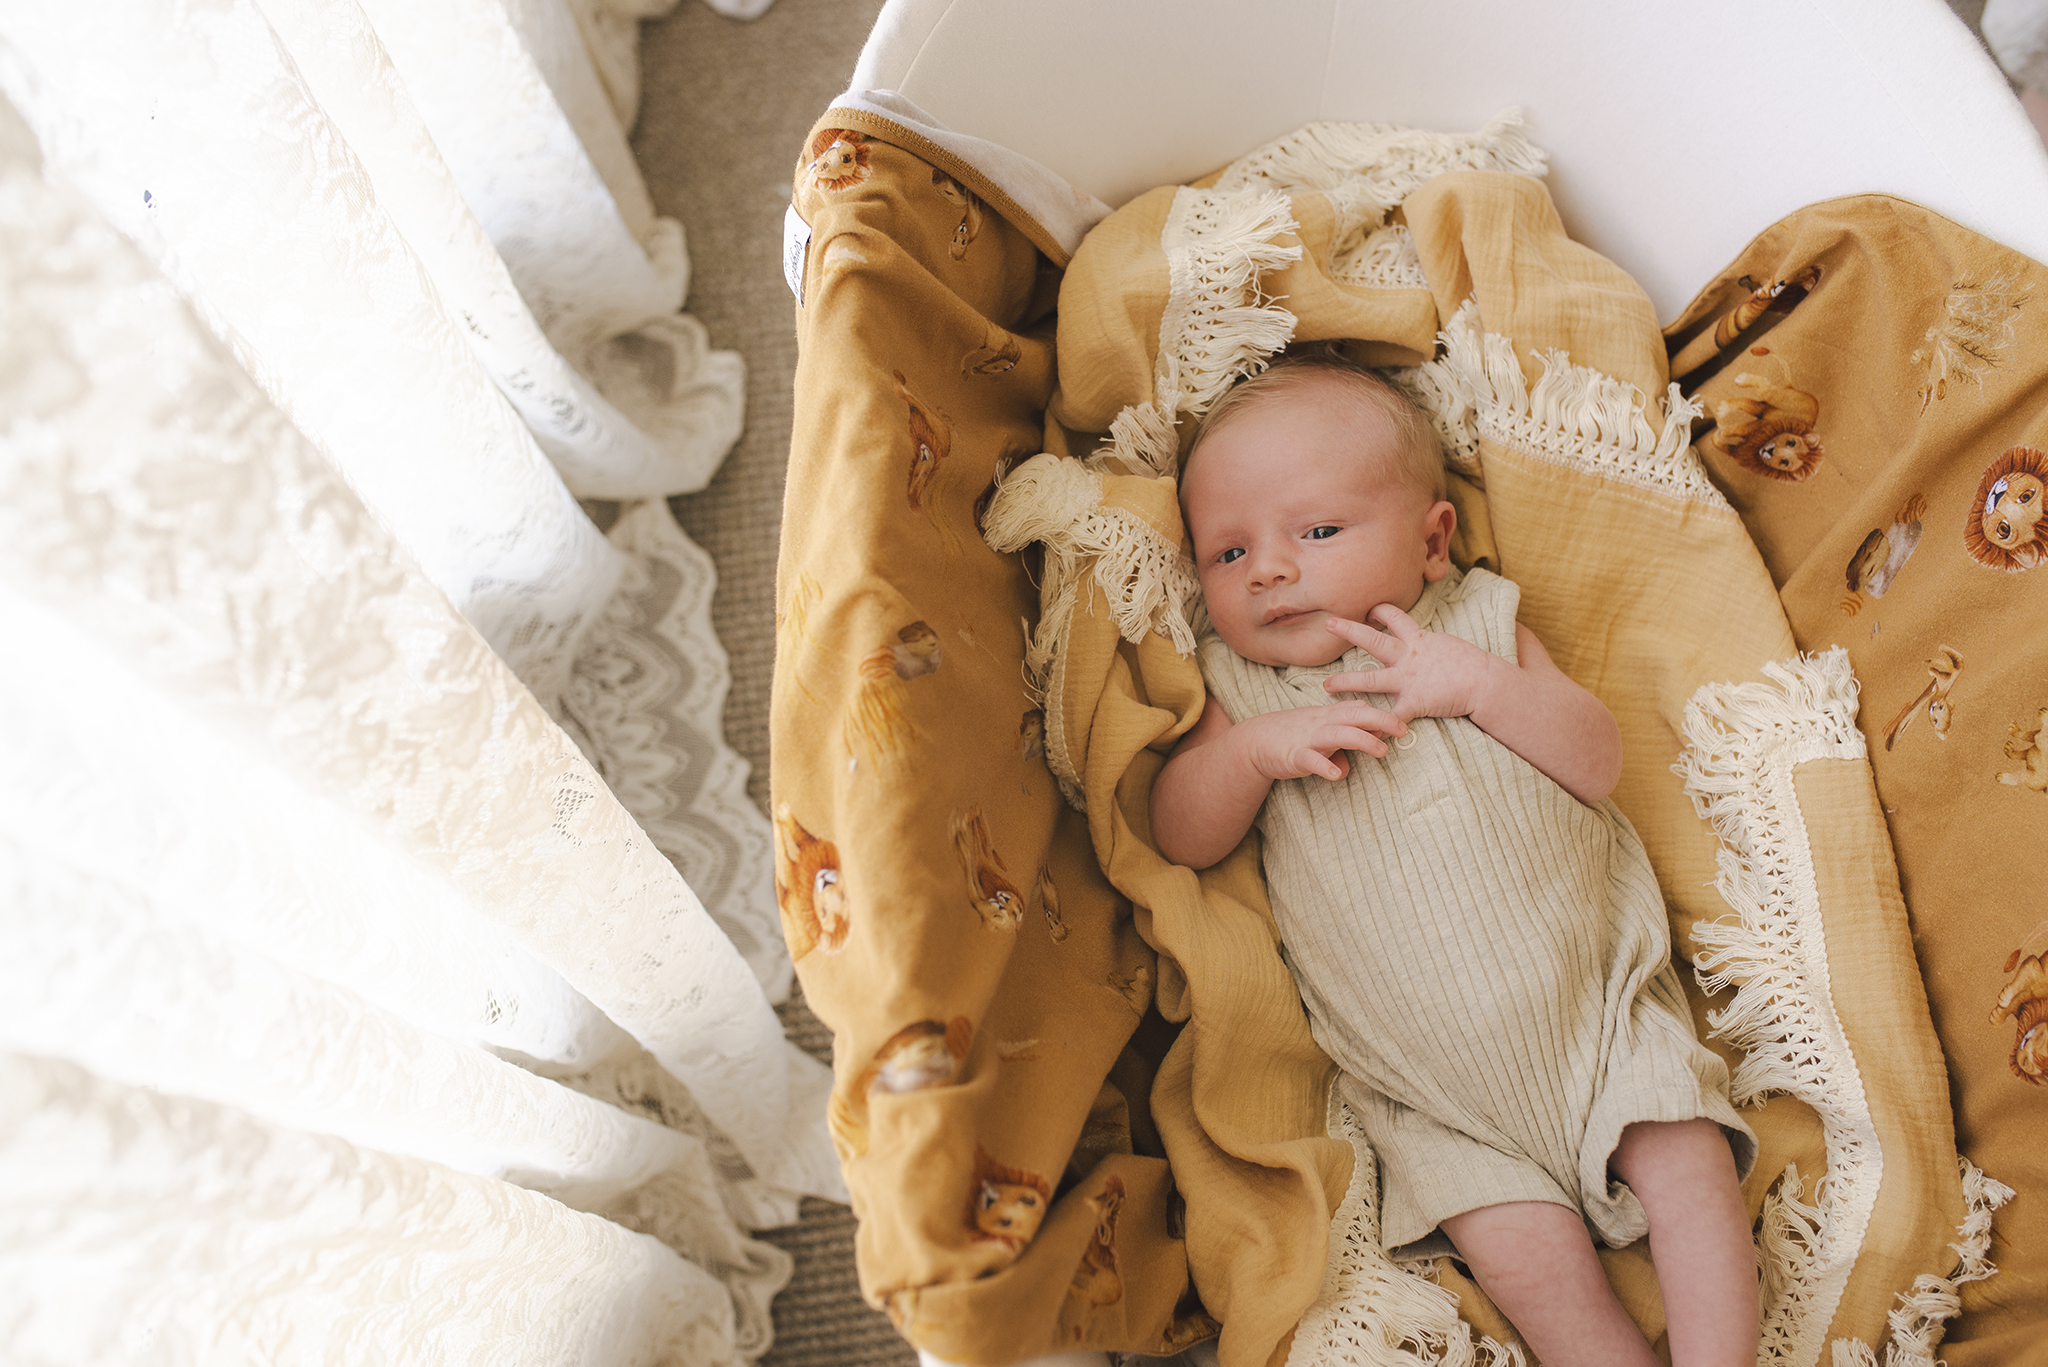 A newborn baby photo. Baby is laying in a nest of blankets, in a basinette next to a lacy window. He is stretched out, awake & interacting with the photographer.